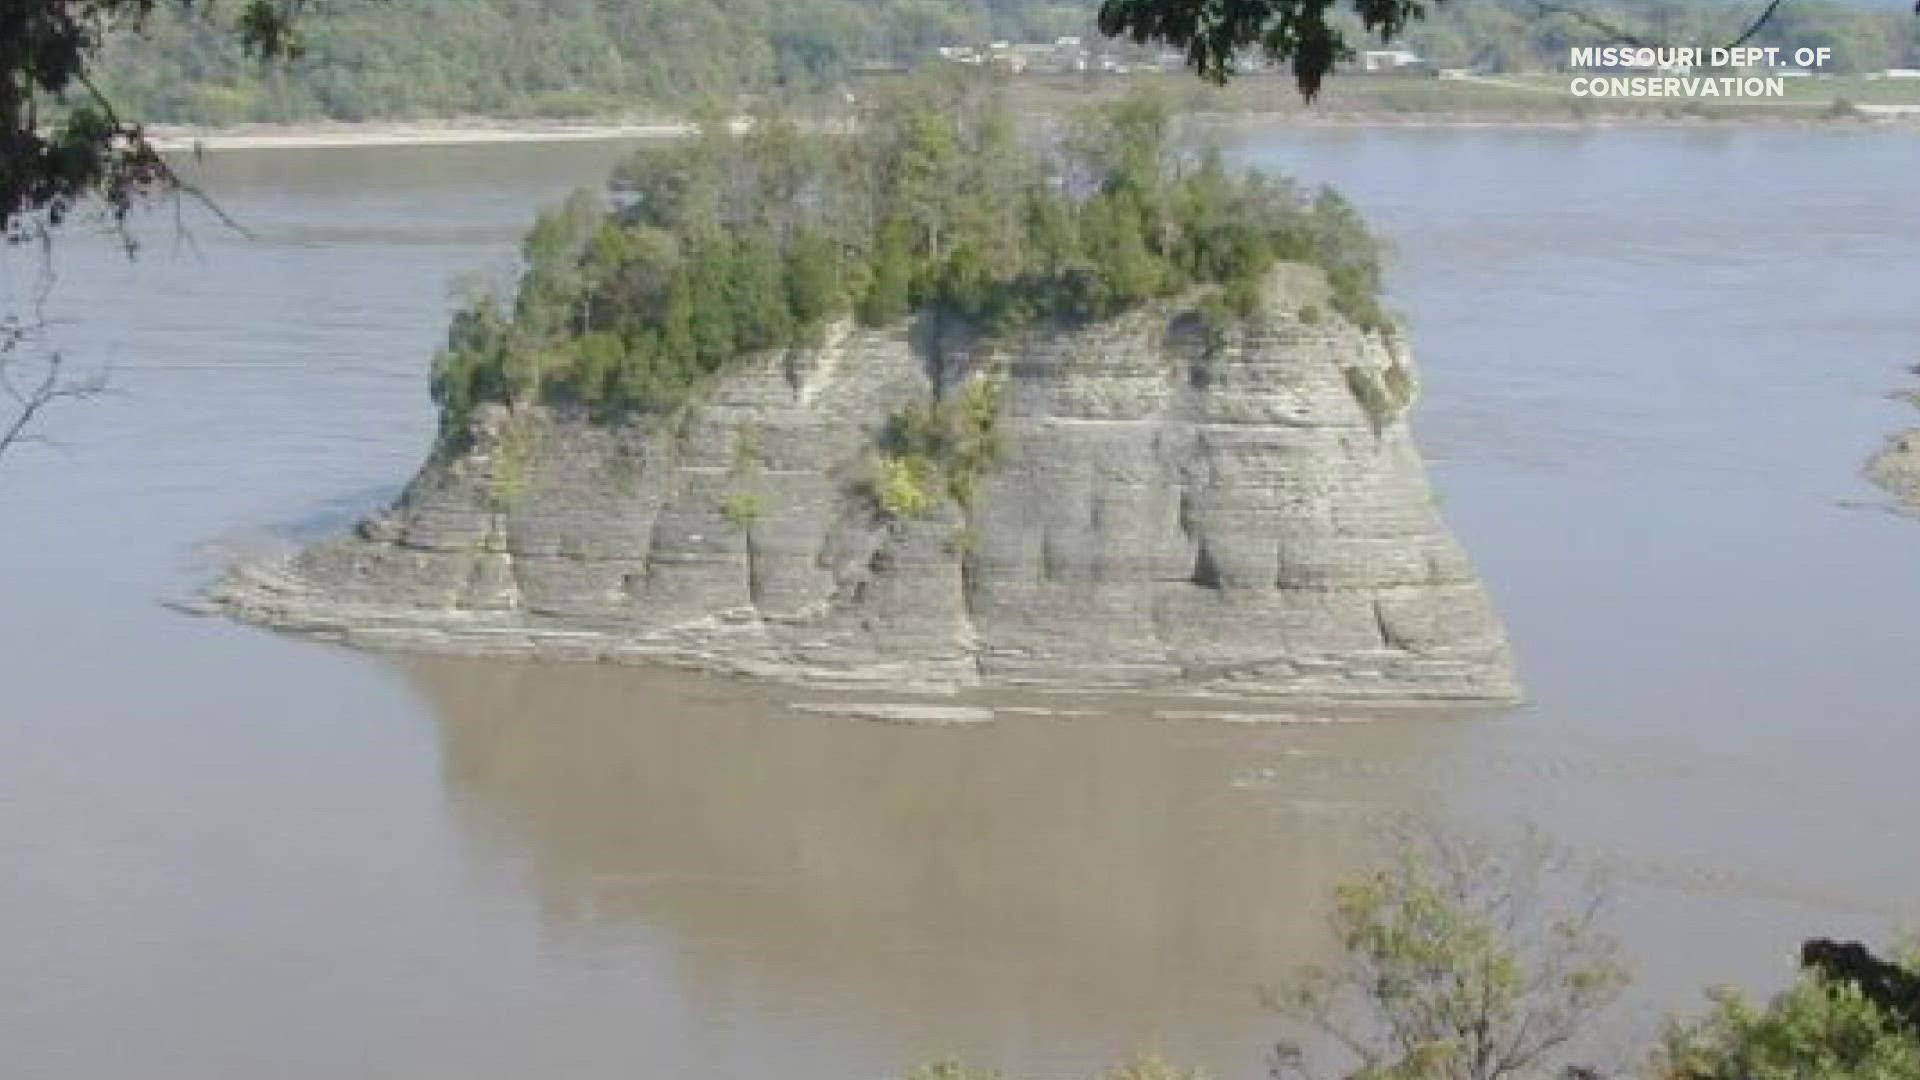 The formation in the Mississippi River that reached sudden popularity in recent weeks is no longer accessible. This is an undated photo.